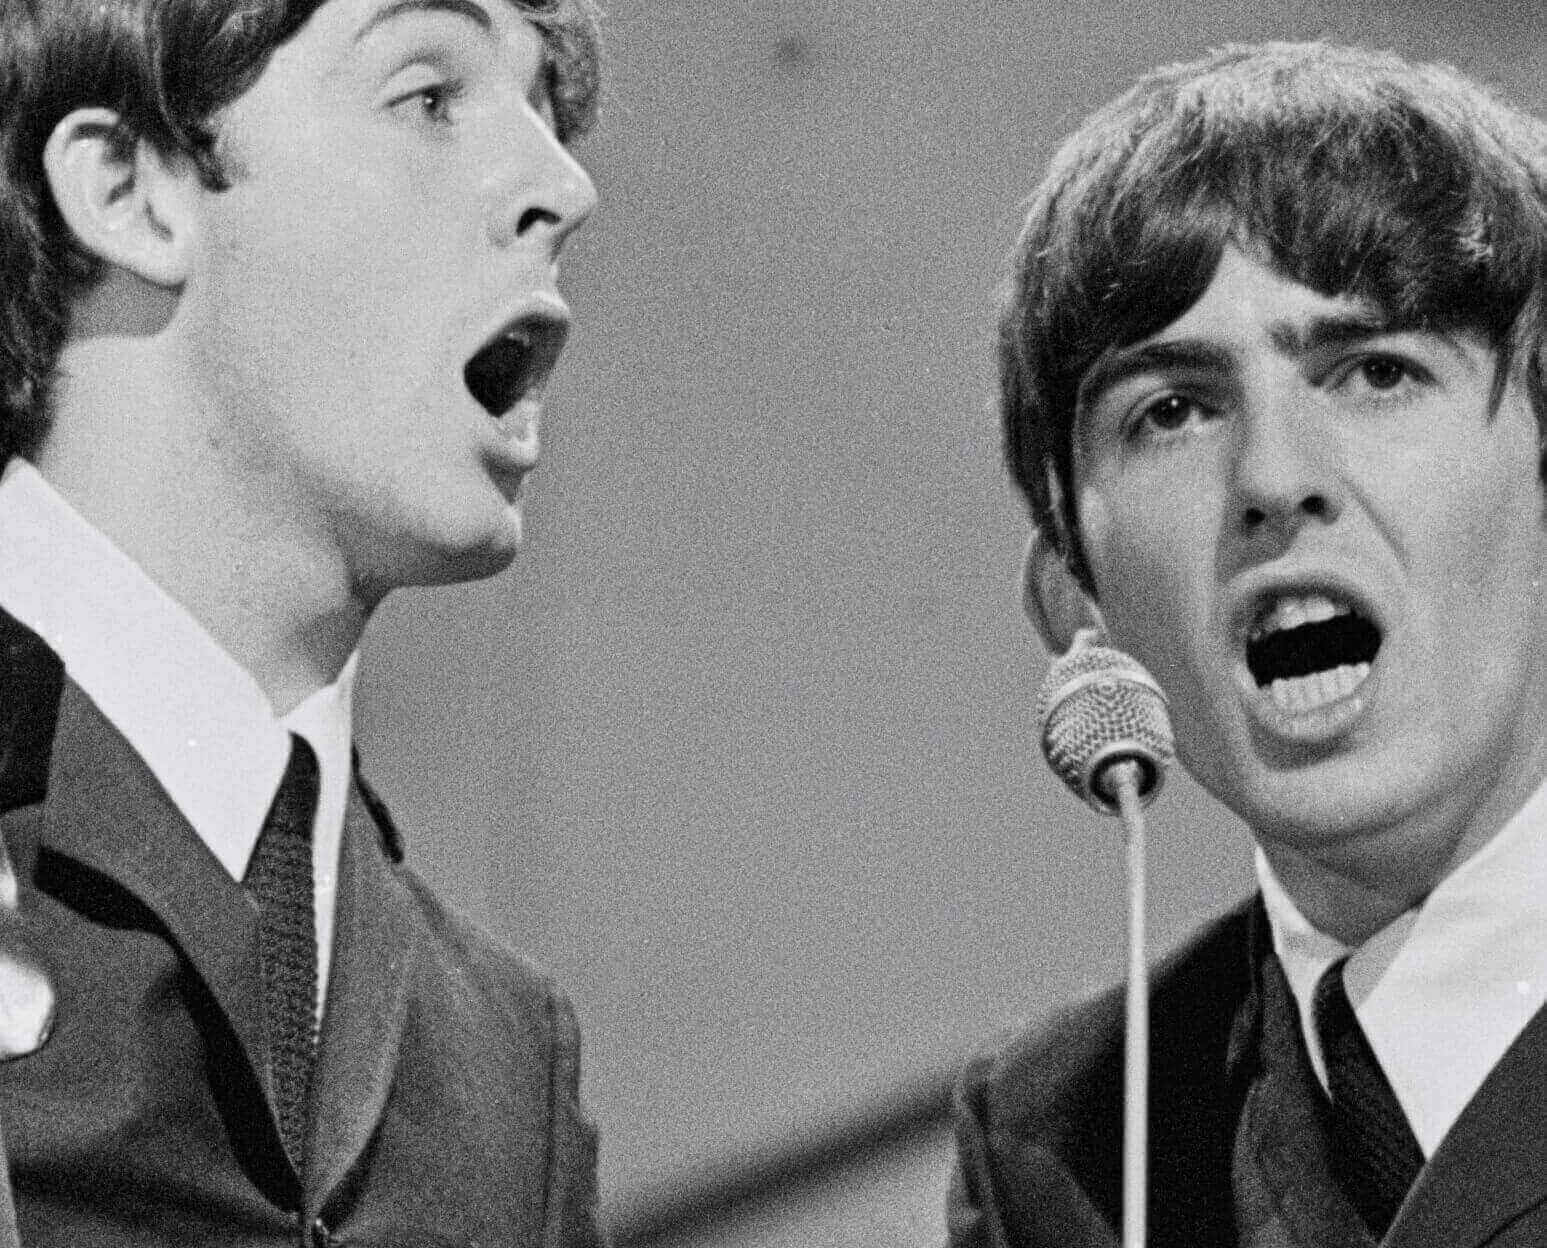 George Harrison and Paul McCartney in black-and-white